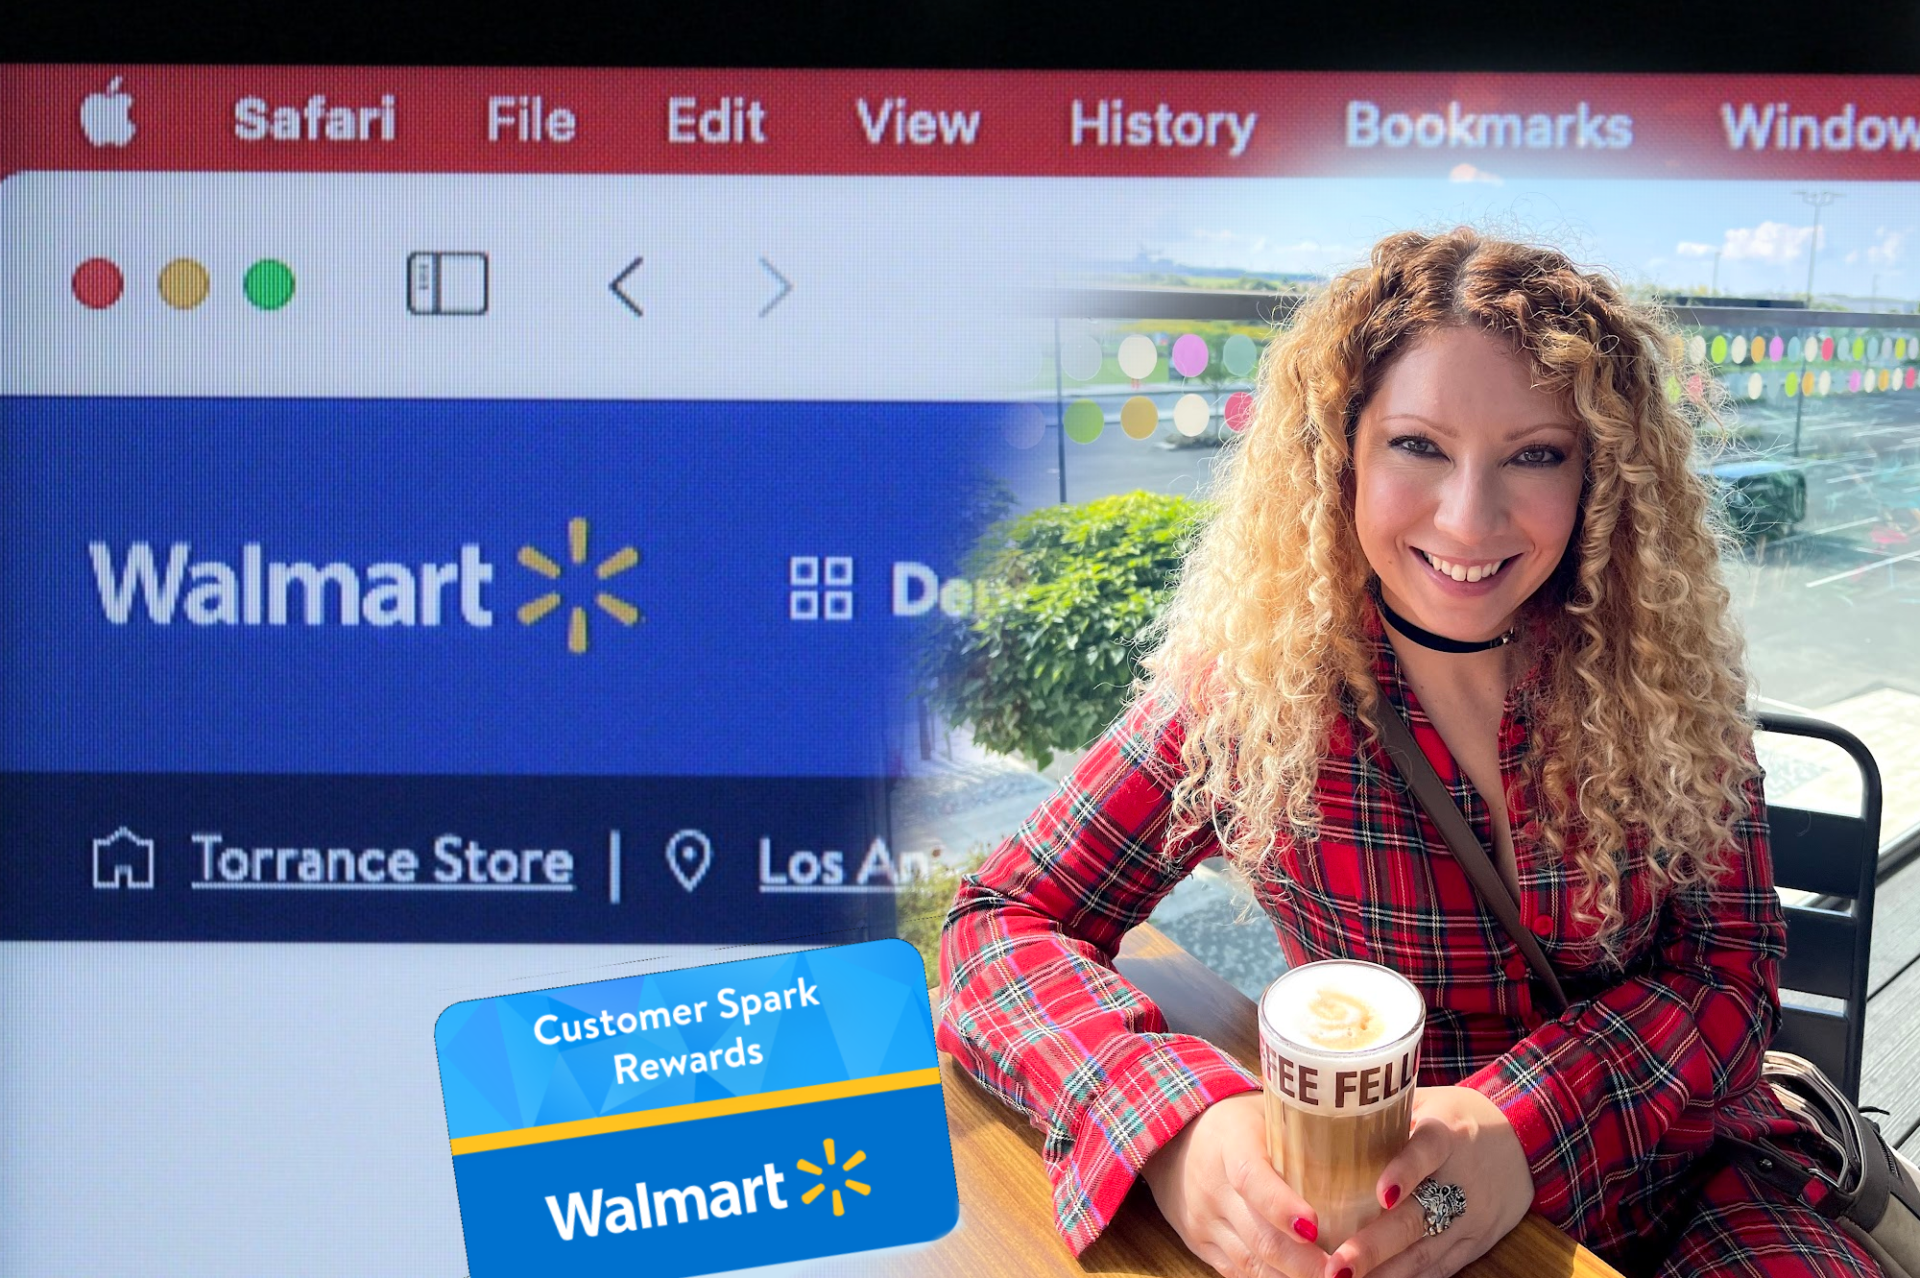 How to Become a Walmart Spark Reviewer & Get Items Free? Lorelei from toptut.com